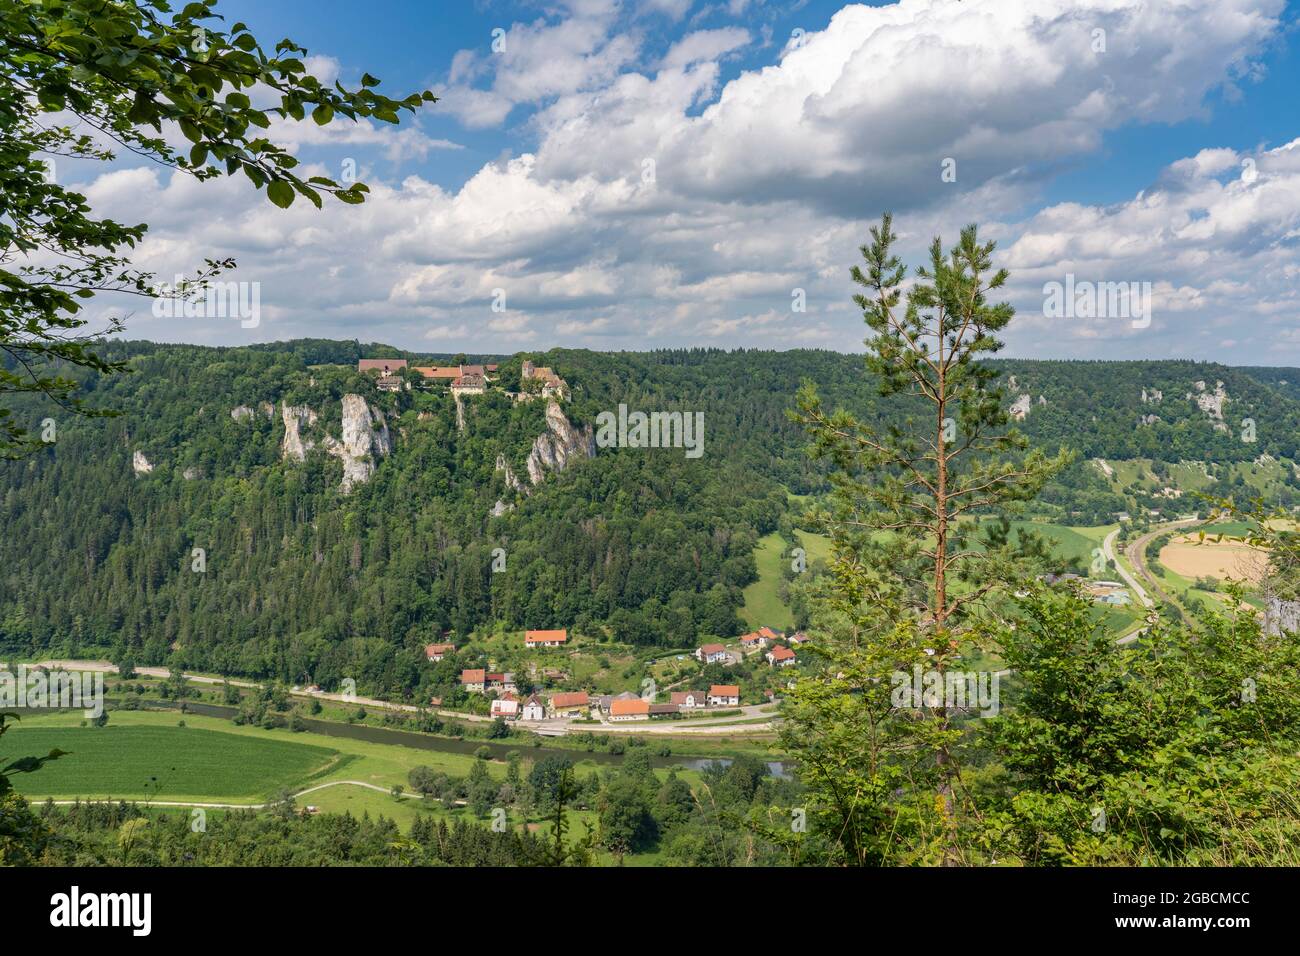 rocky landscape in the Danube Valley between Beuron an Sigmaringen, Baden-Wurttemberg, Germany Stock Photo